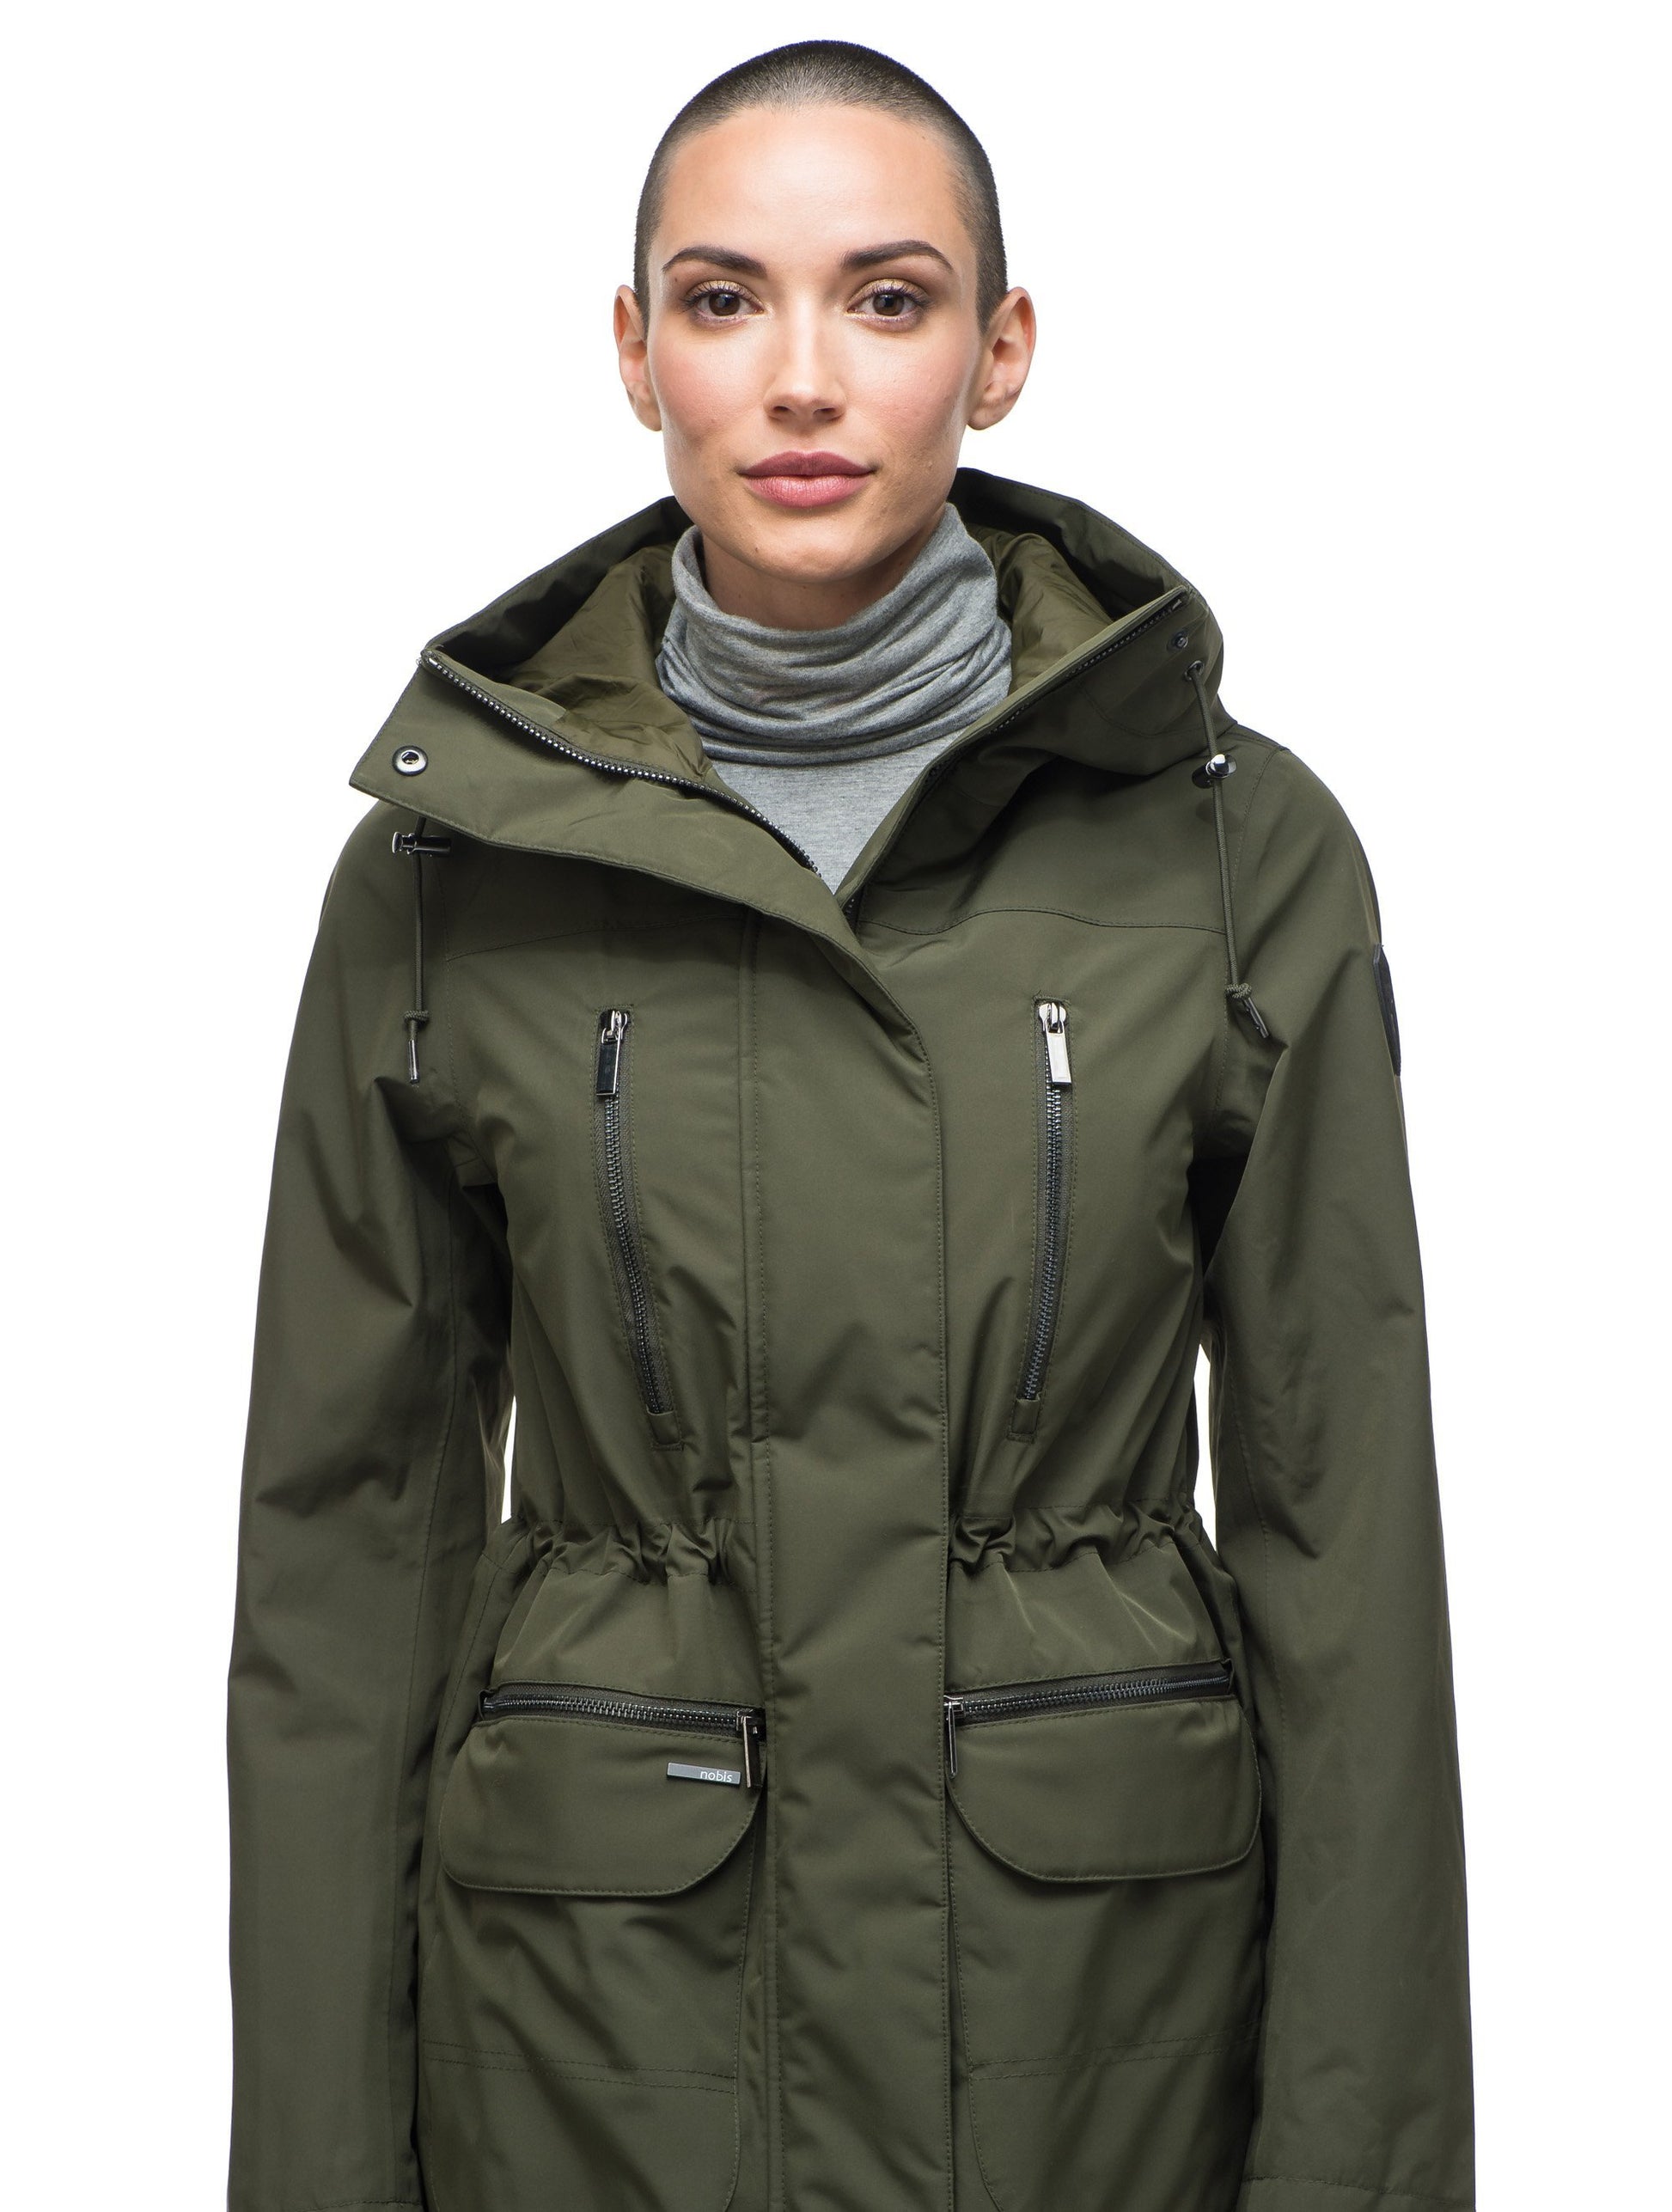 Women's knee length anorak with four front pockets and adjustable cord waist in Fatigue